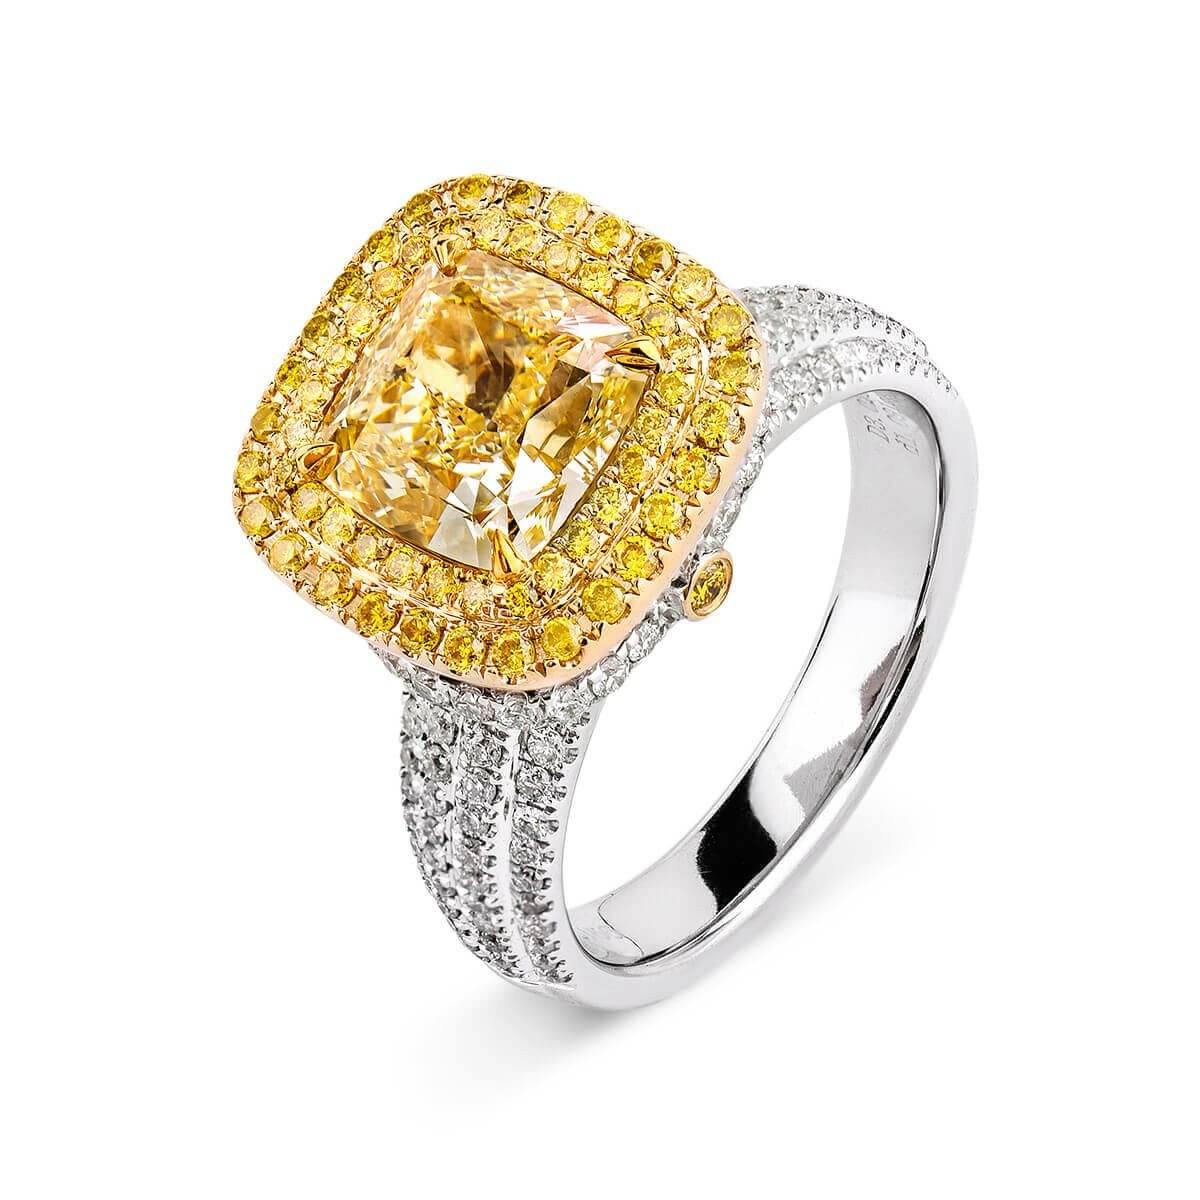 FANCY YELLOW RING - 4.55 CT


Set in 18K White gold


Total fancy yellow diamond weight: 3.50 ct
[ 1 diamond ]
Color: Fancy yellow
Clarity: VS2

Total small fancy yellow diamond weight: 0.32 ct
[ 66 diamonds ]
Color: Fancy yellow
Clarity: VS

Total